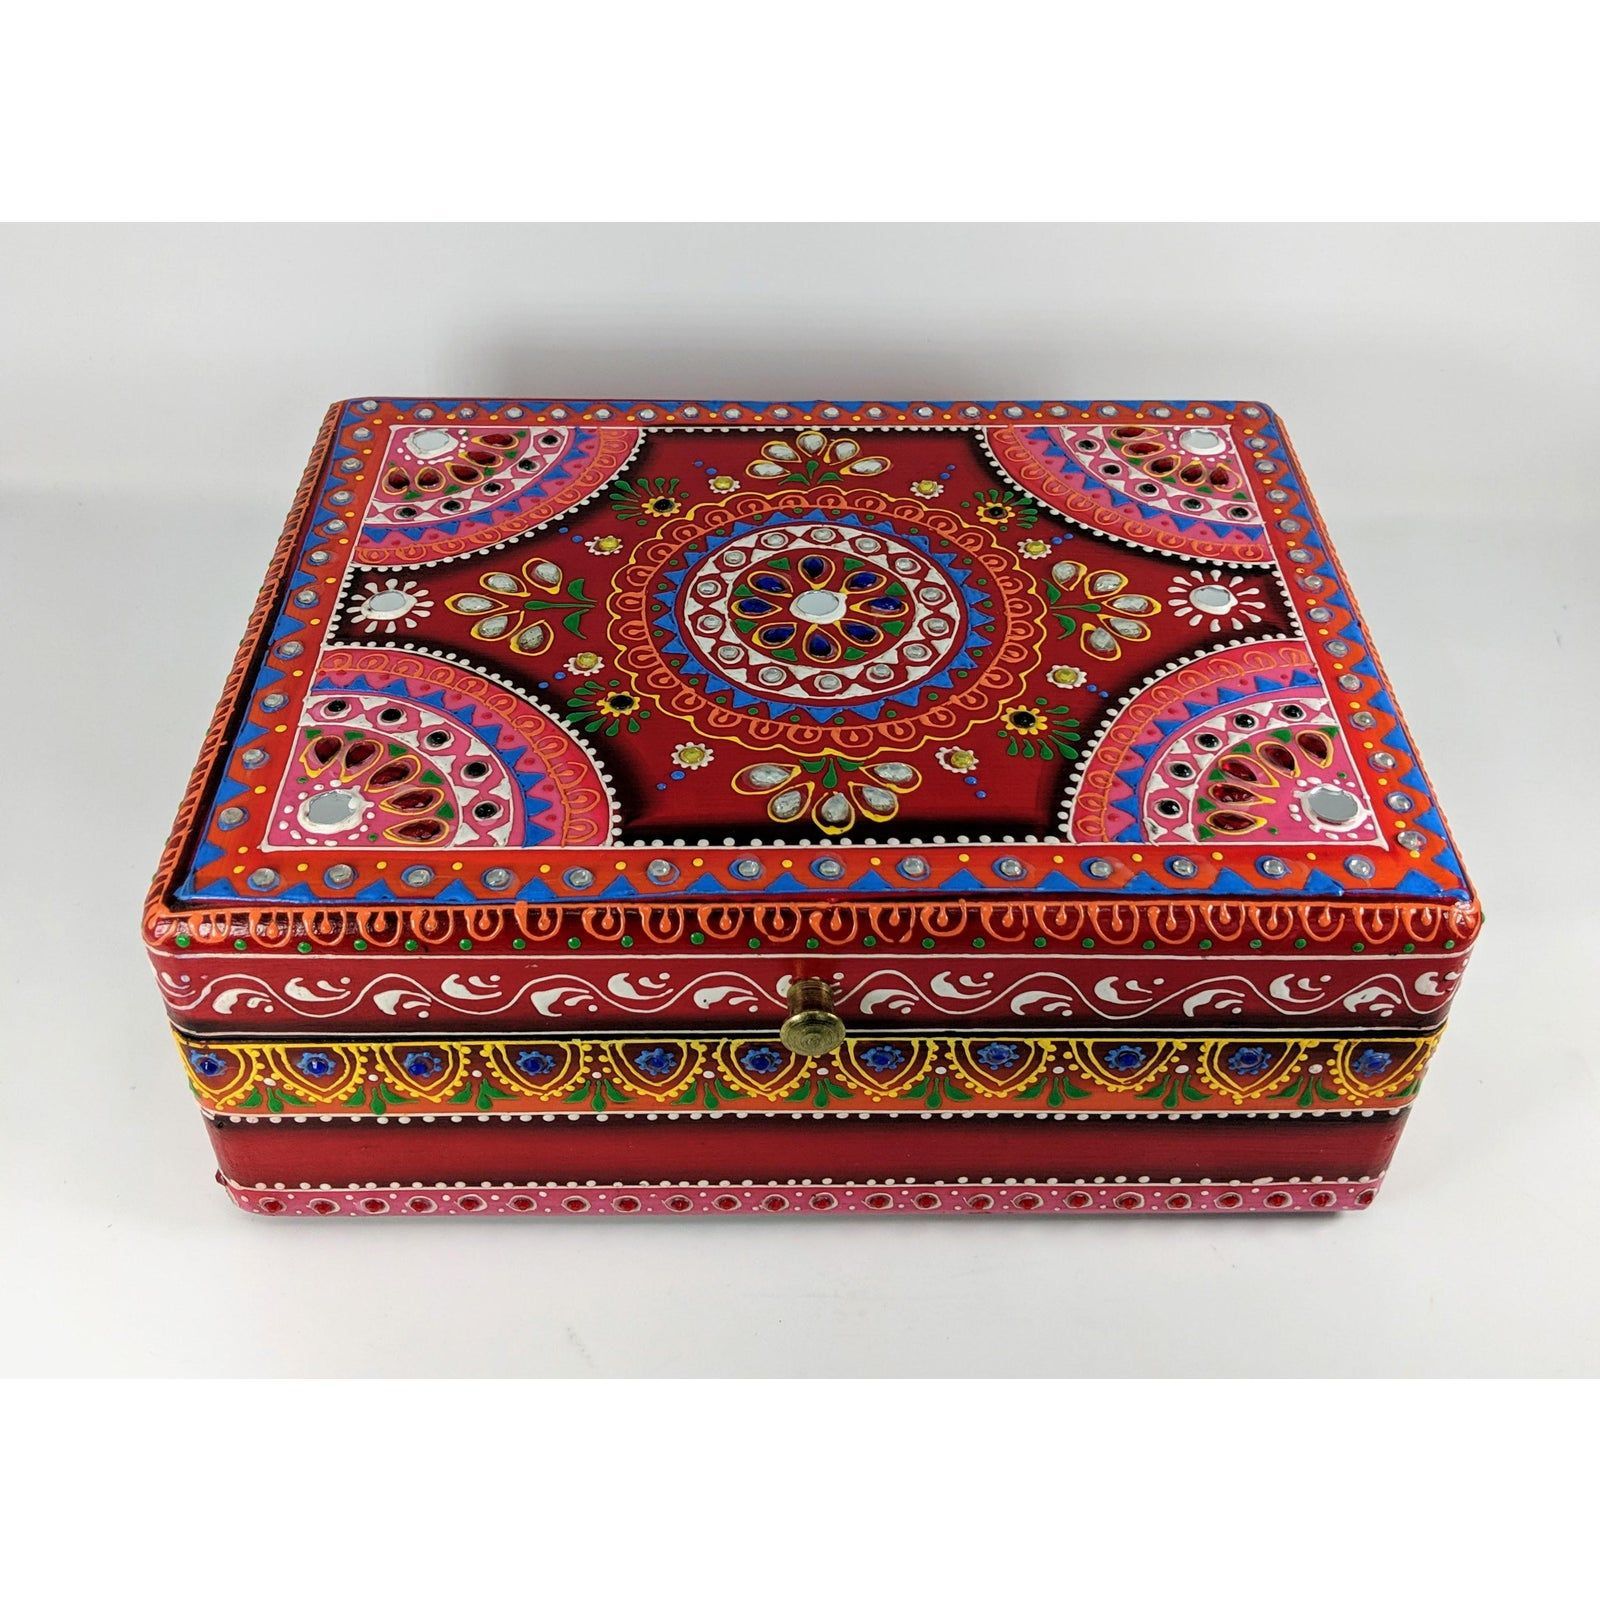 Moroccan Hand Painted and Hand Decorated Indian Decorative Wooden Box - Moroccan Hand Painted and Hand Decorated Indian Decorative Wooden Box -   19 diy Box painting ideas